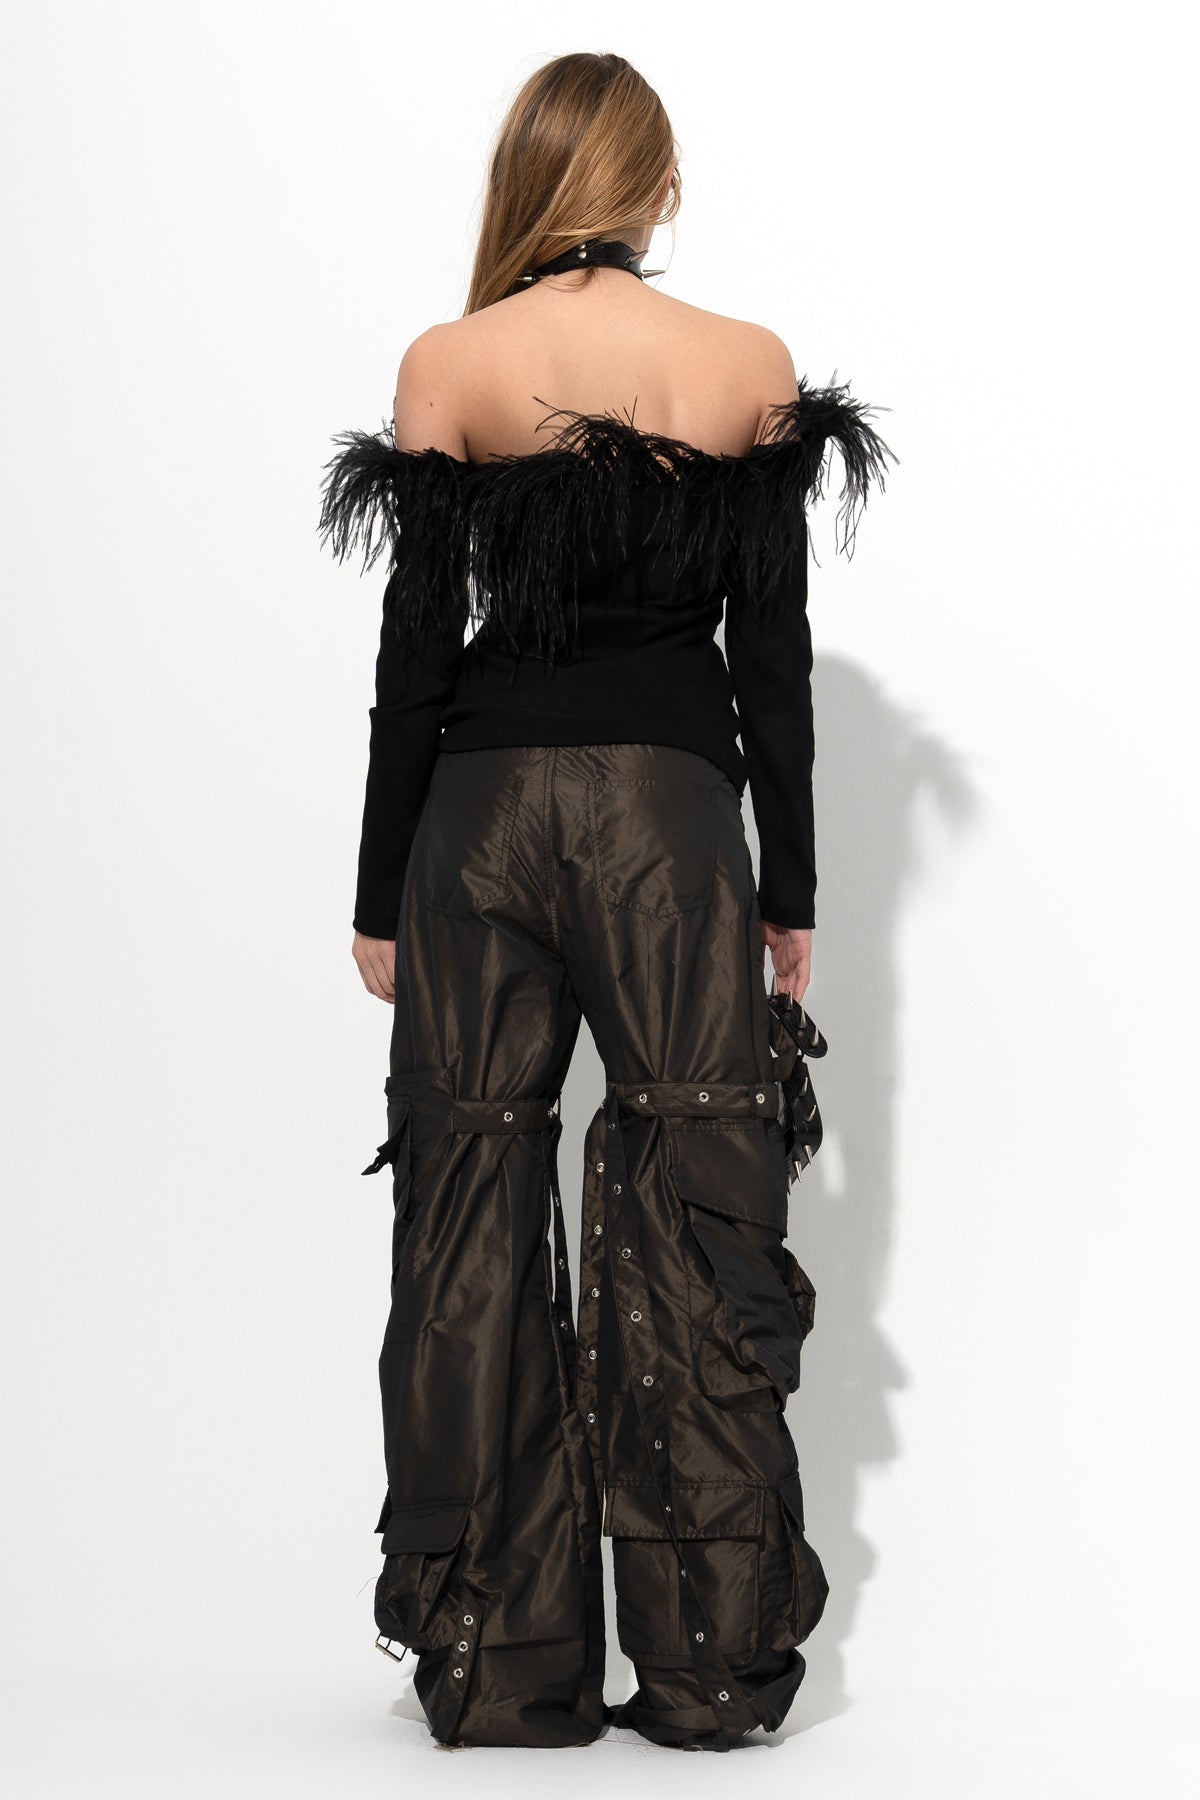 BLACK LONG SLEEVE TOP WITH FEATHERS marques almeida